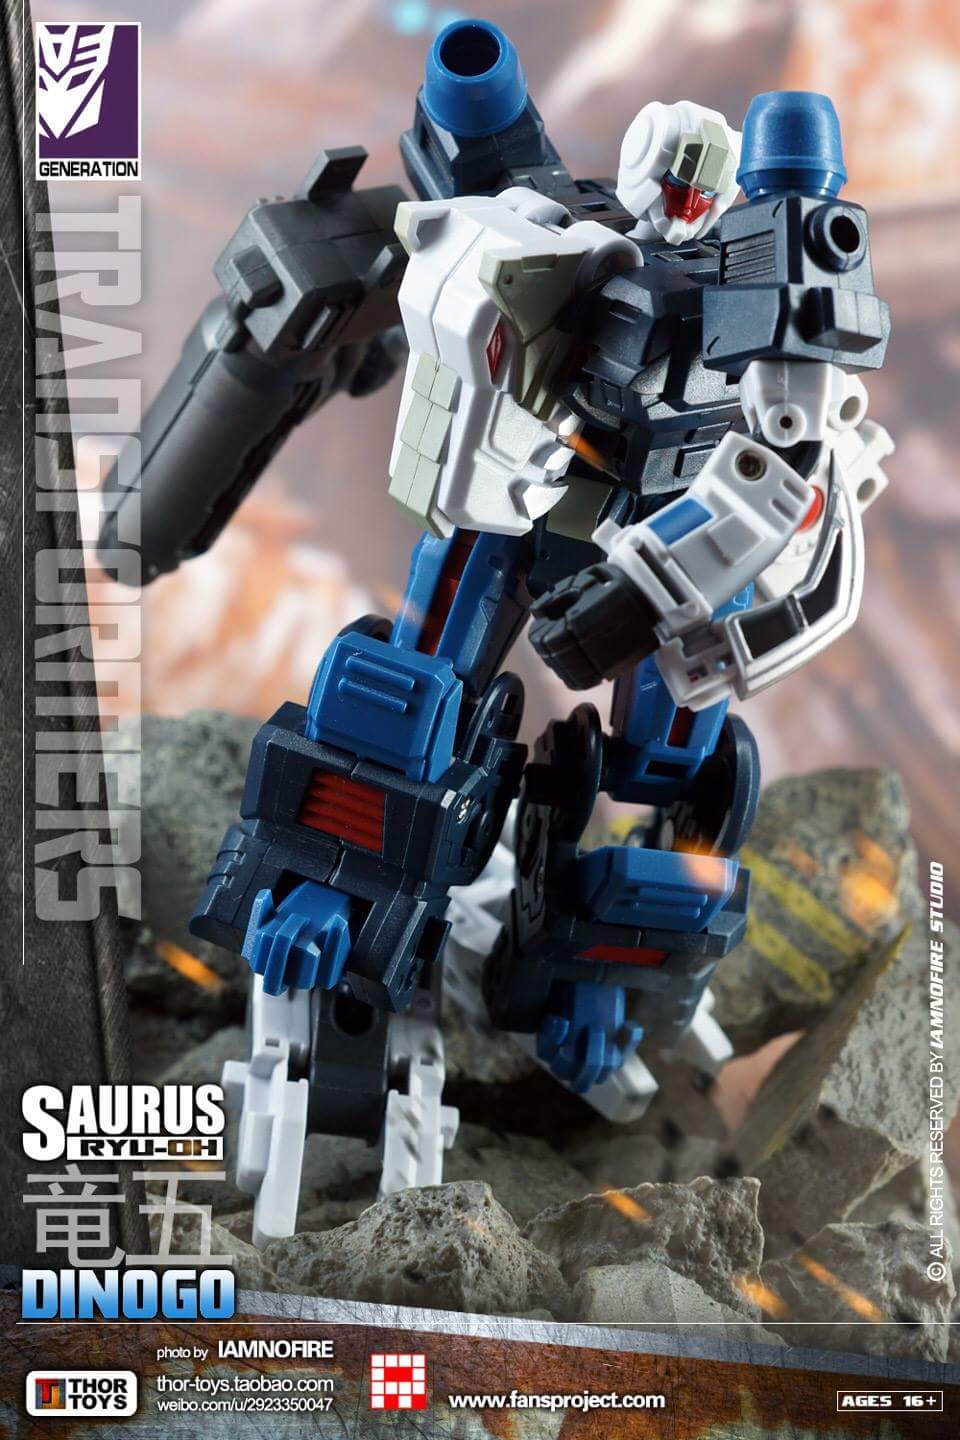 [FansProject] Produit Tiers - Ryu-Oh aka Dinoking (Victory) | Beastructor aka Monstructor (USA) - Page 2 YPoChrcz